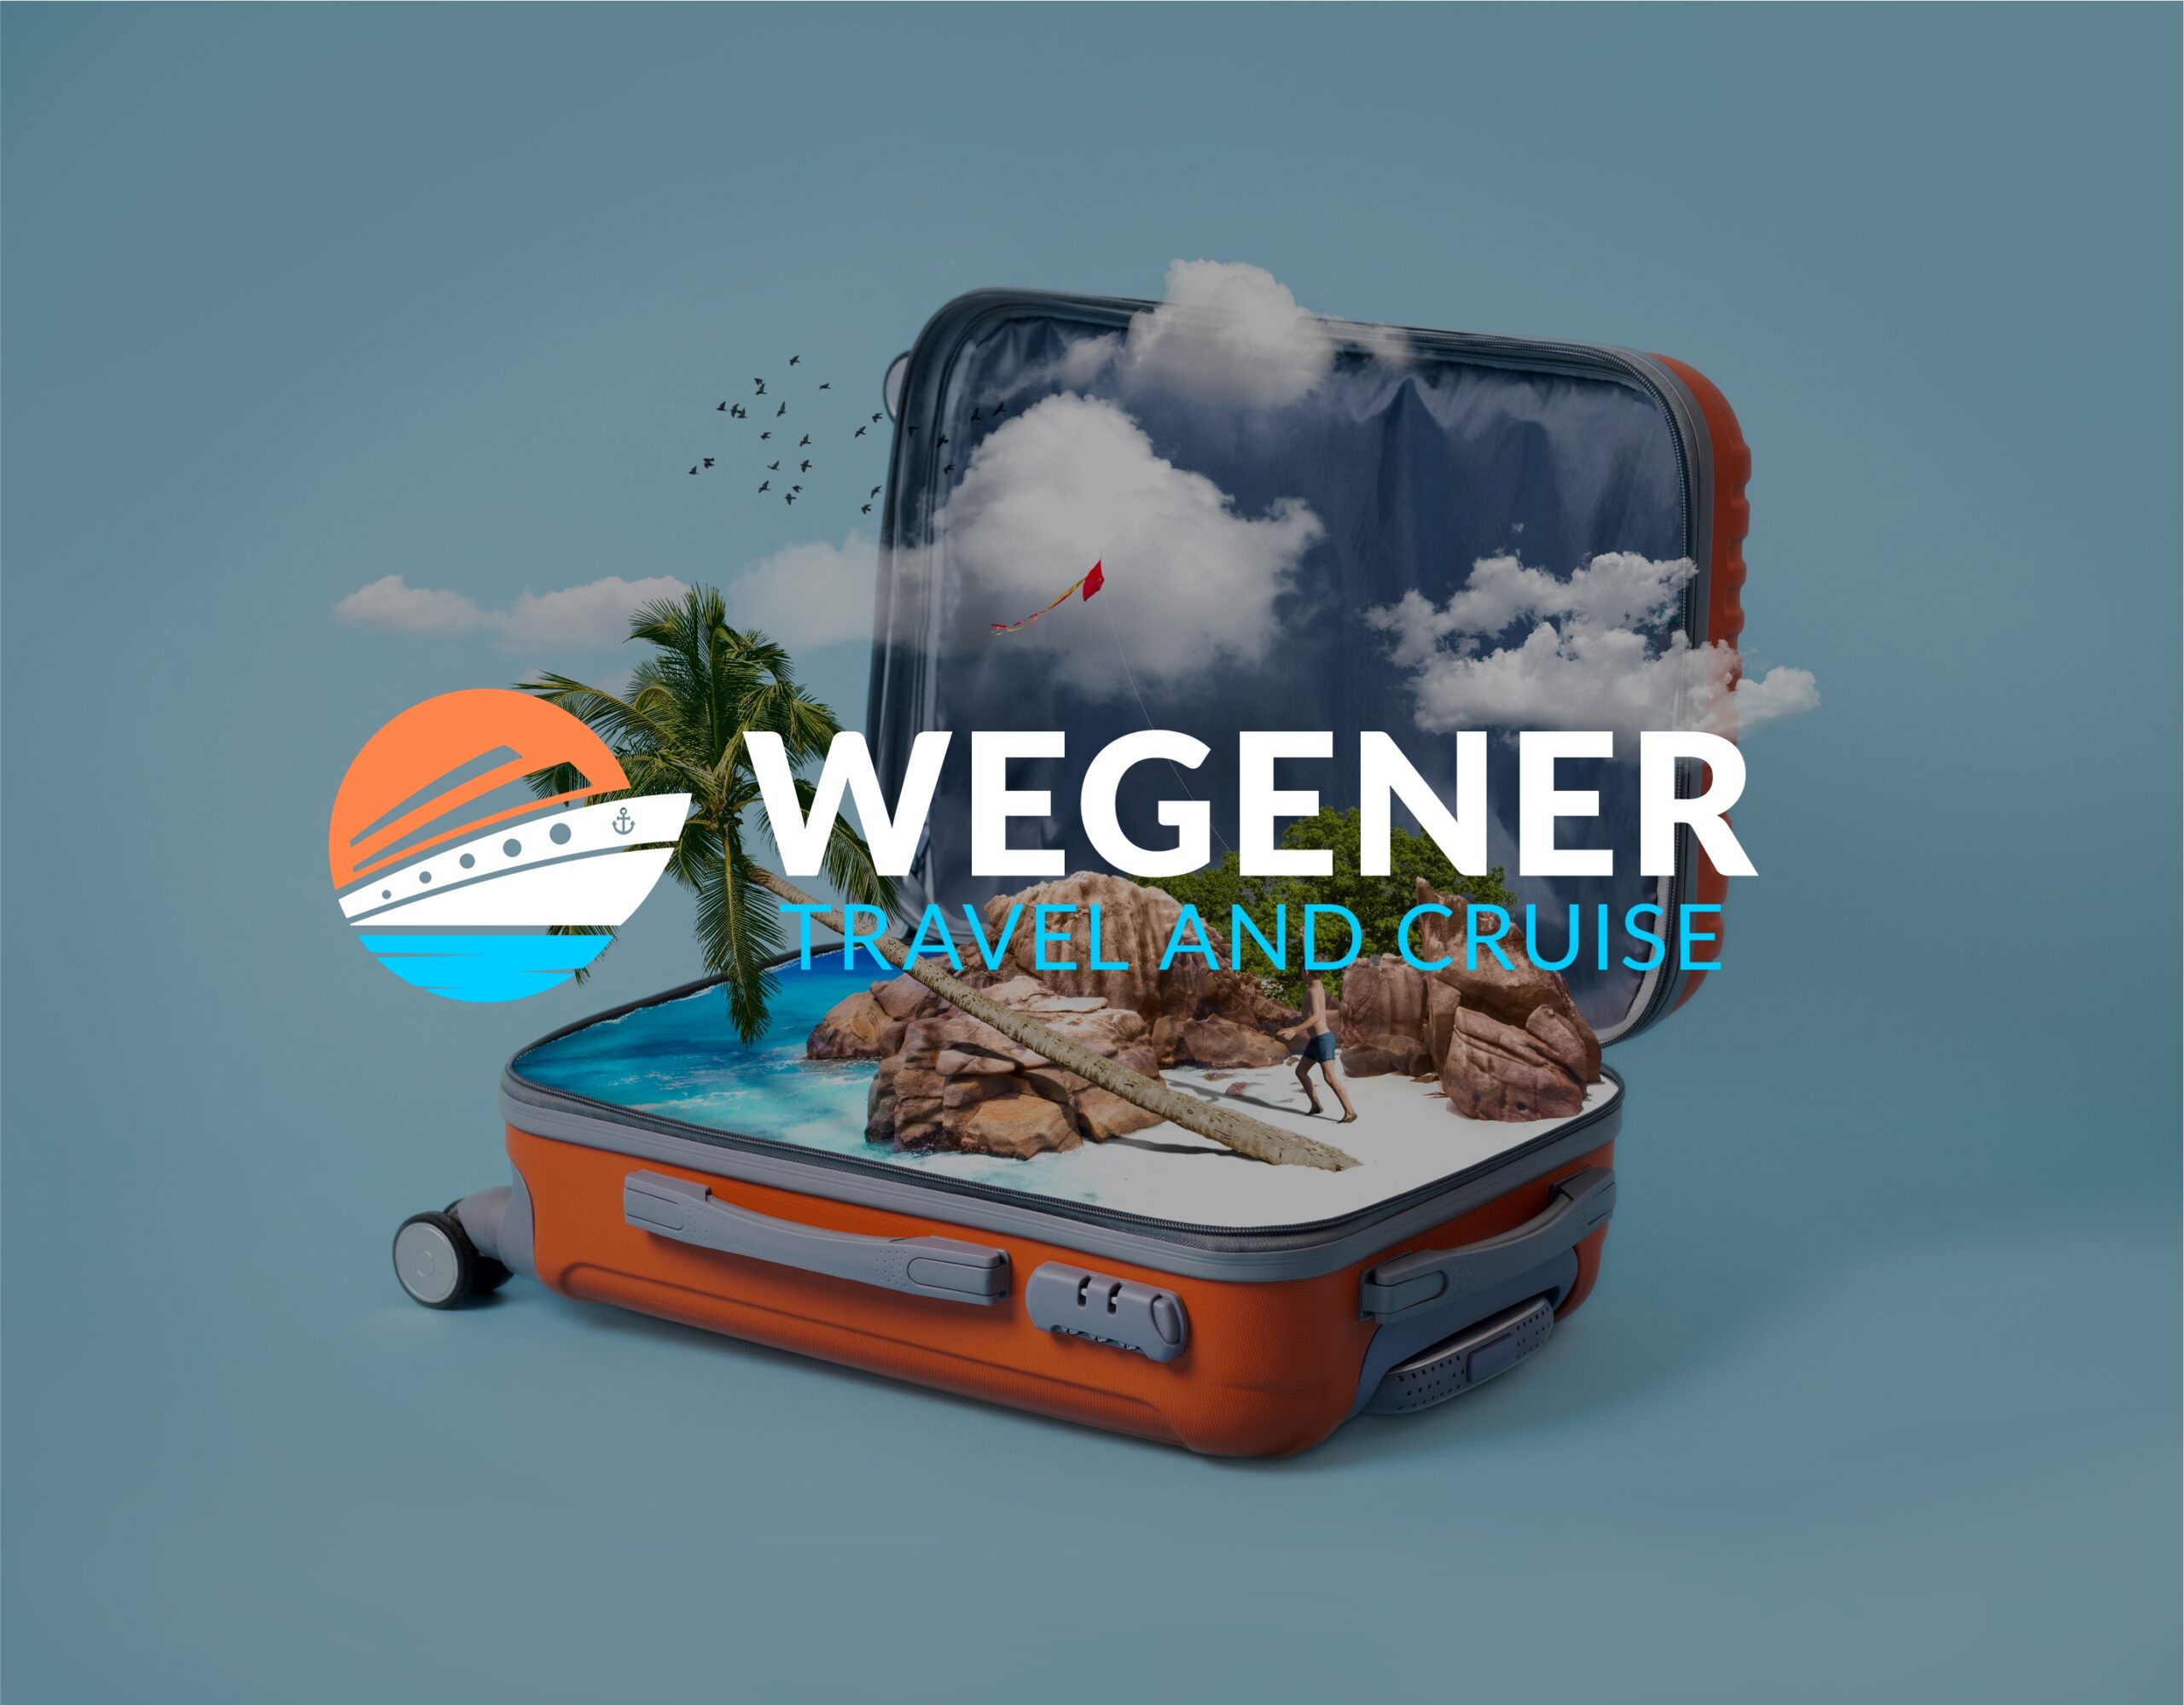 The Wegener Travel and Cruise logo in front of an open suitcase. The suitcase has an island scene in it.